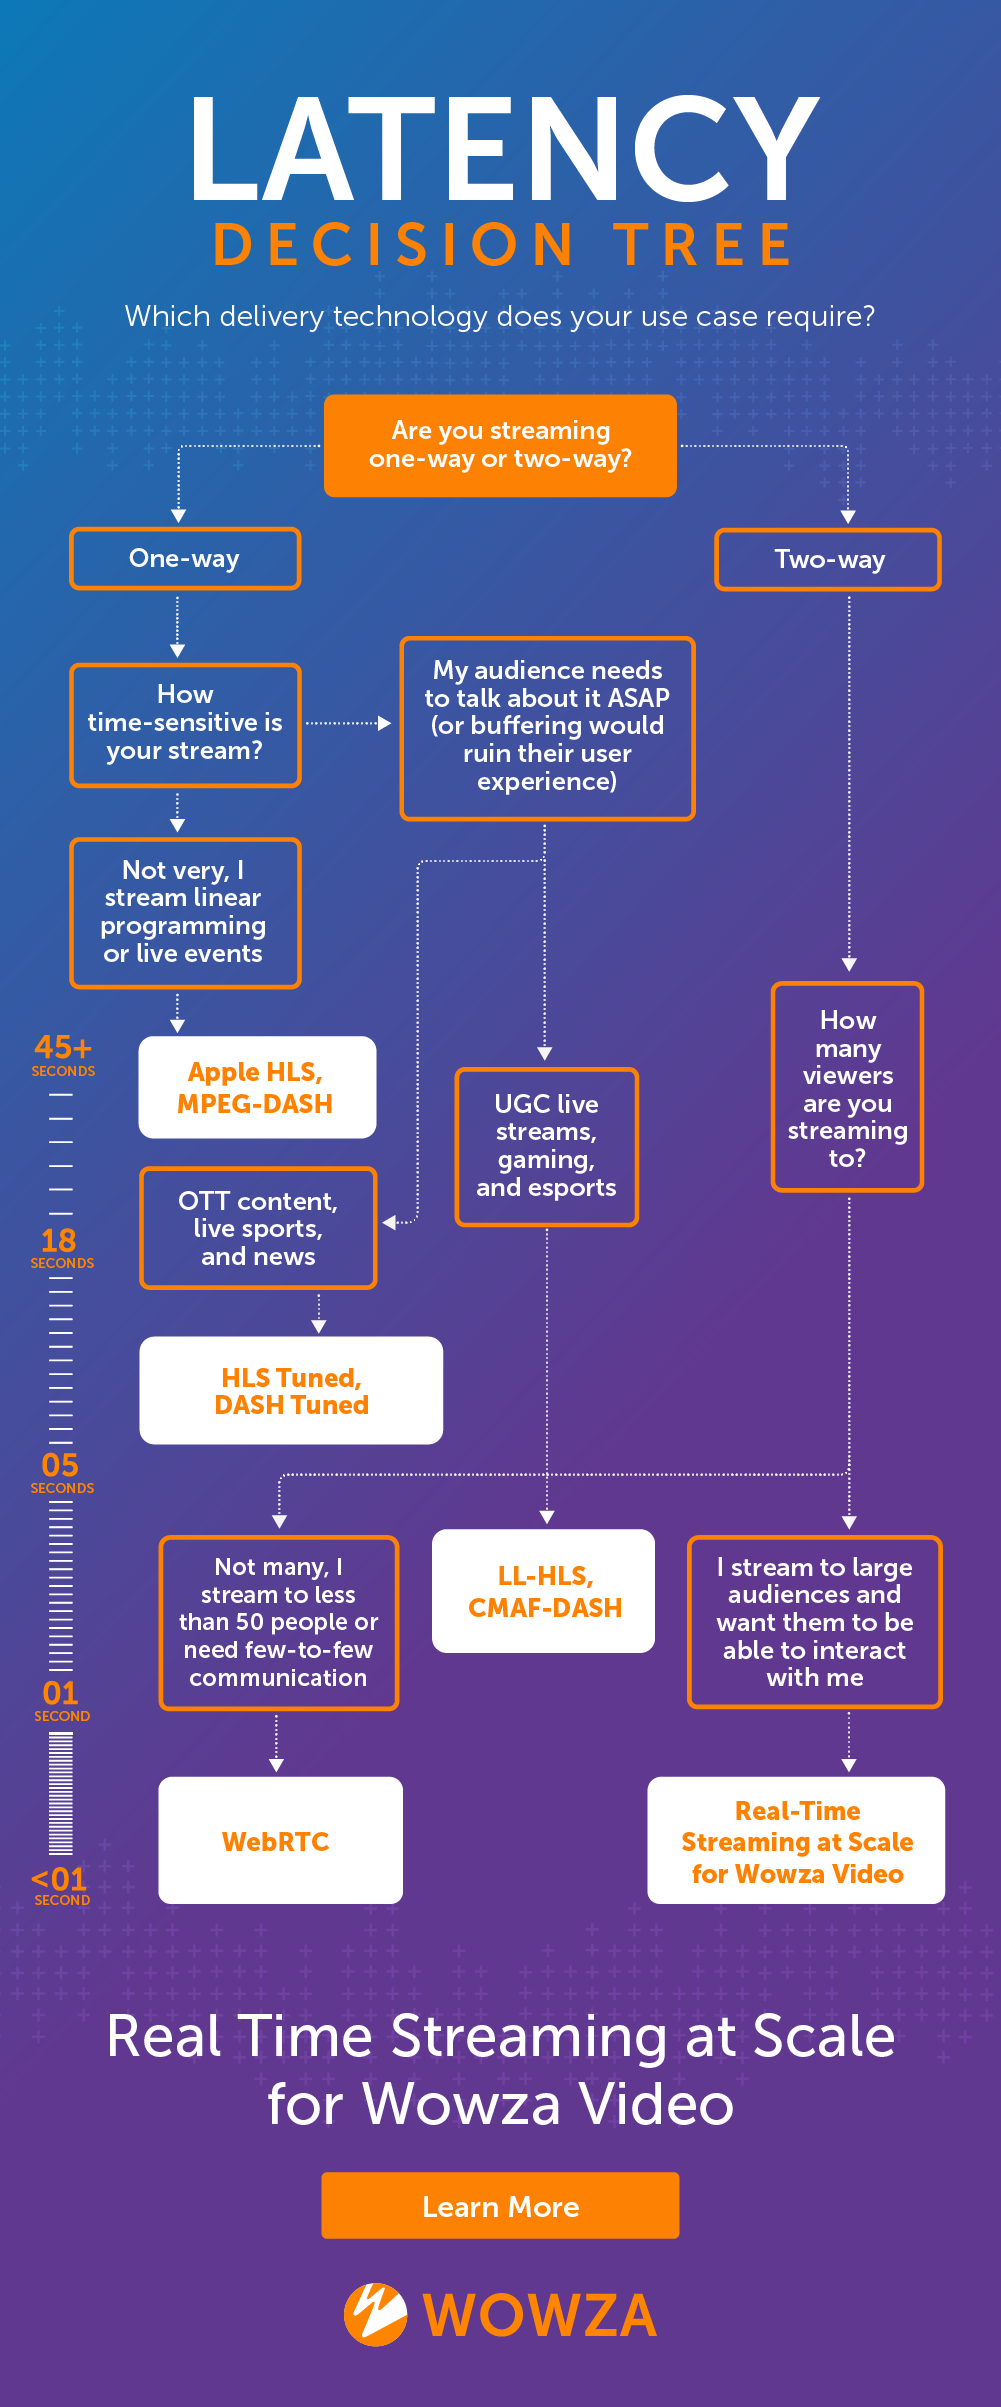 A decision tree asking questions about a content distributor's specific use case and thereby determining what latency measure to aim for and the right protocols or solutions to achieve that goal.